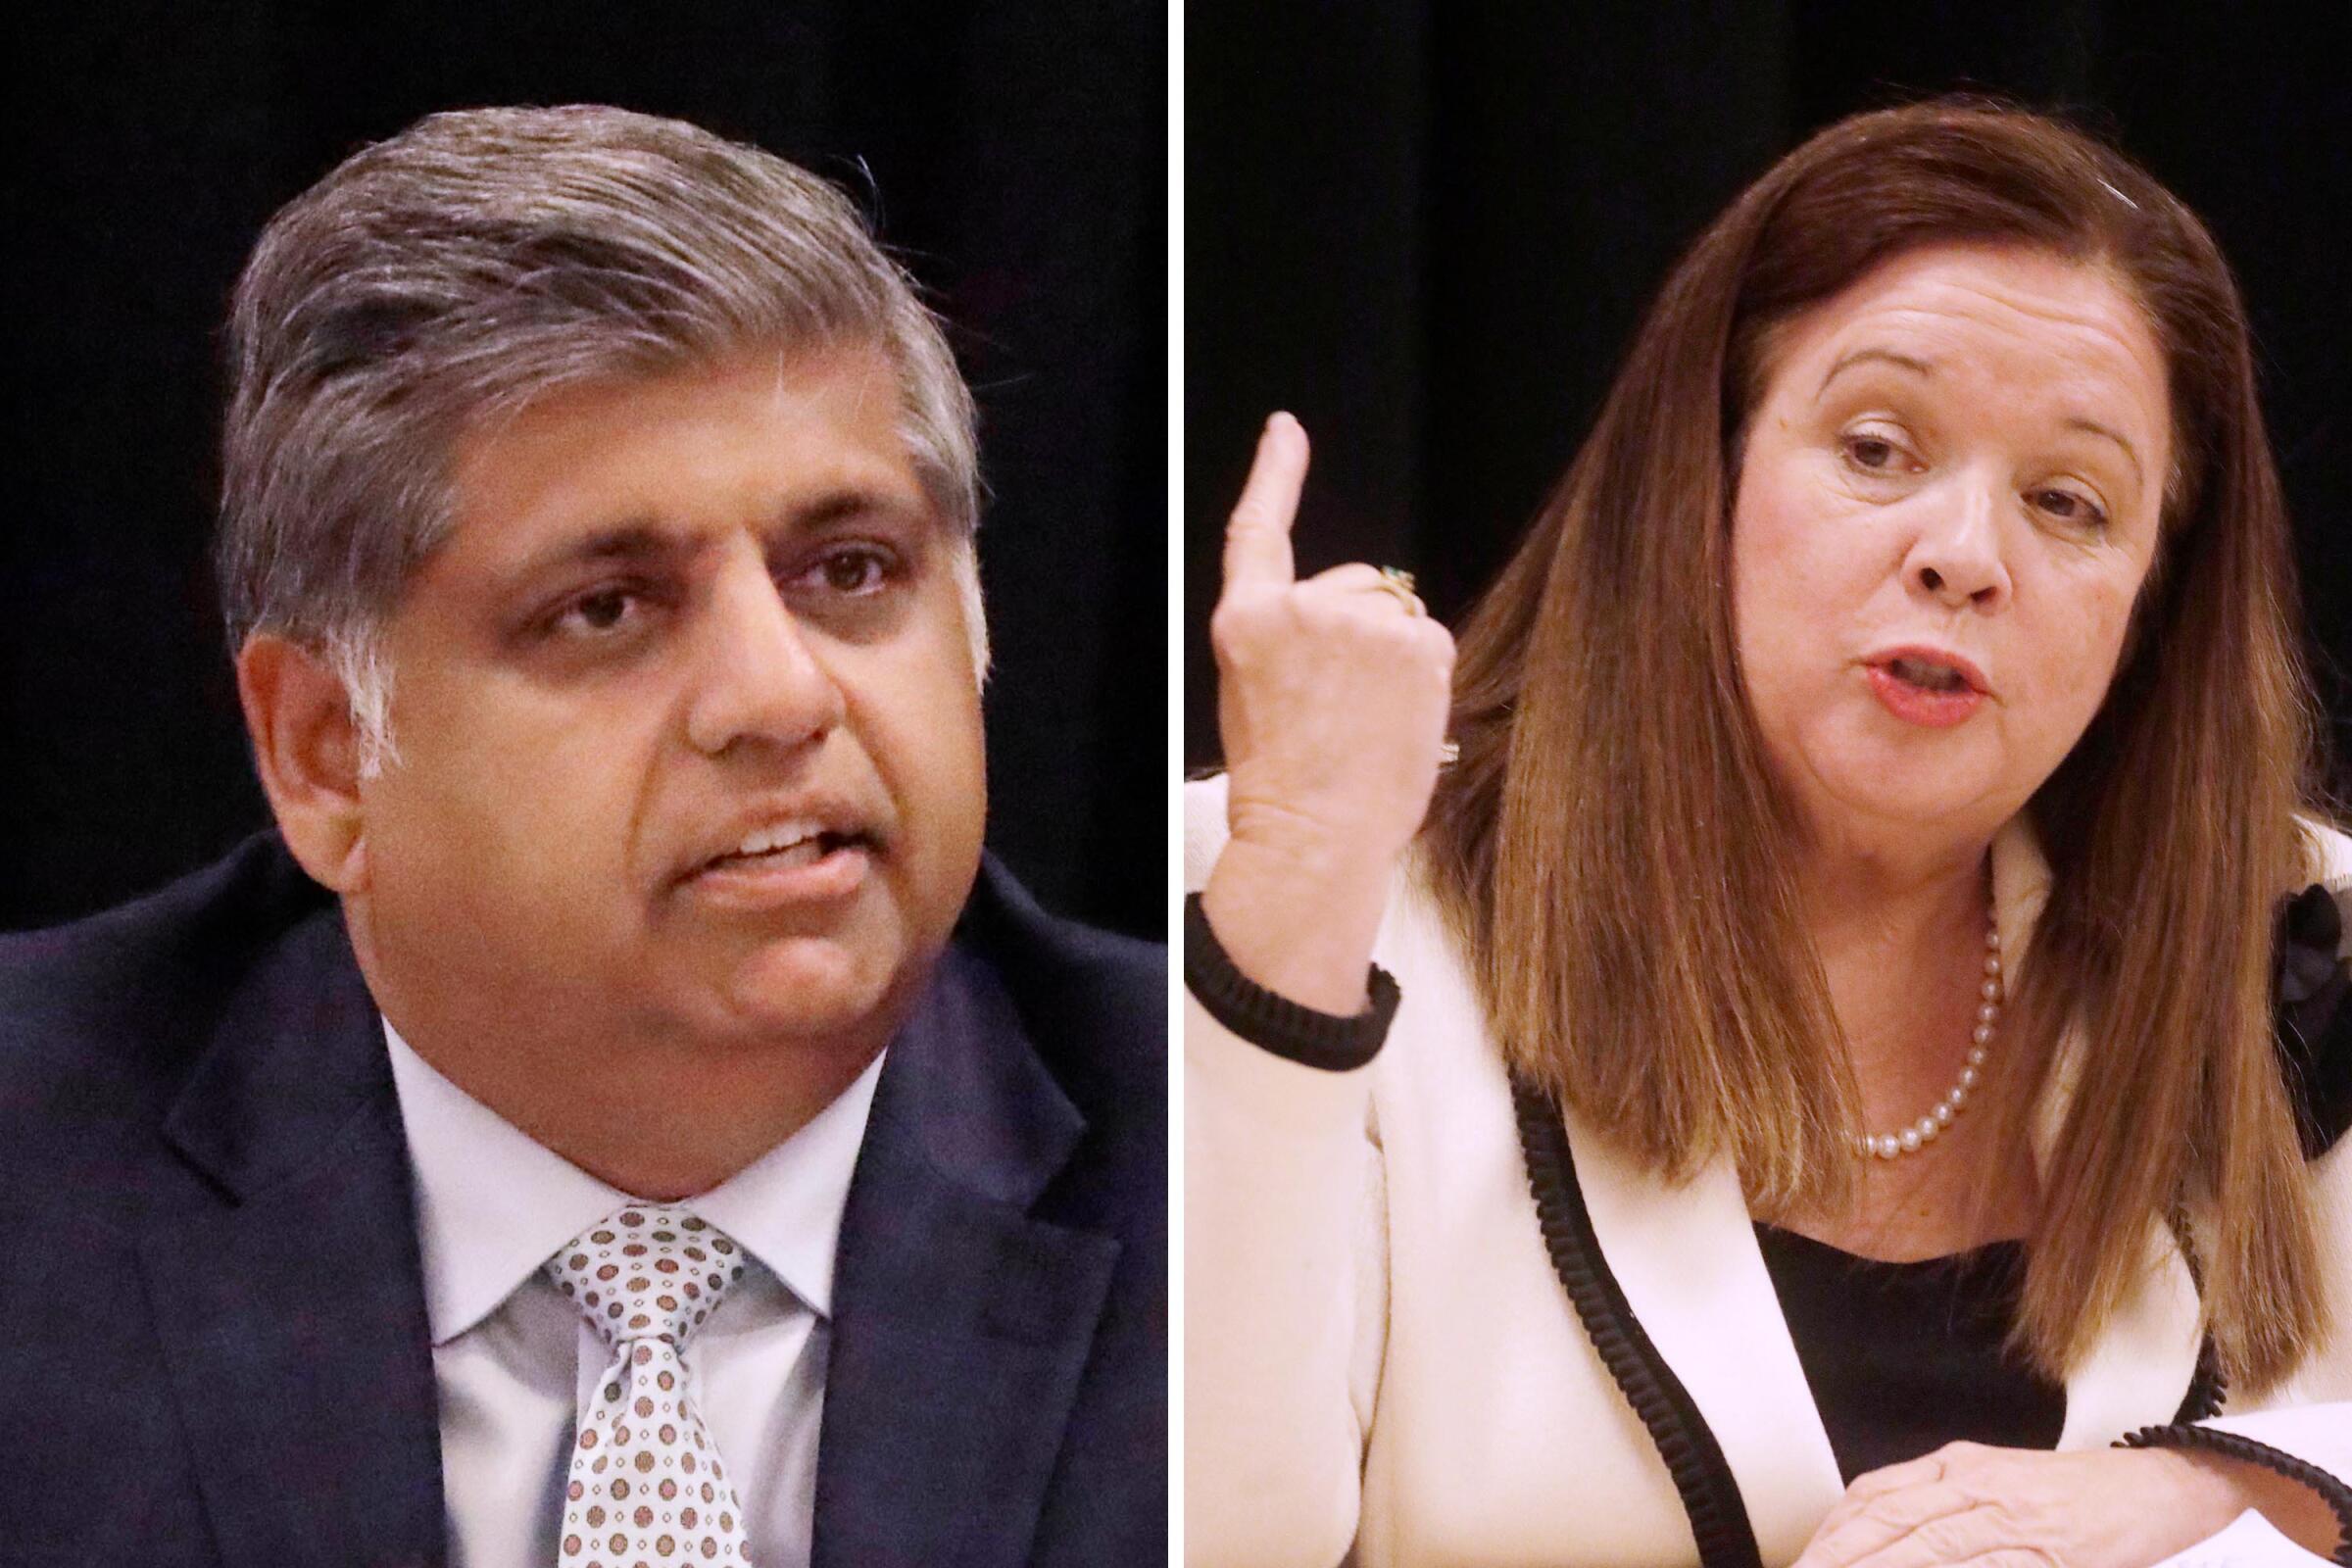 Candidates for the city attorney's race Faisal Gill, left, and Hydee Feldstein Soto.